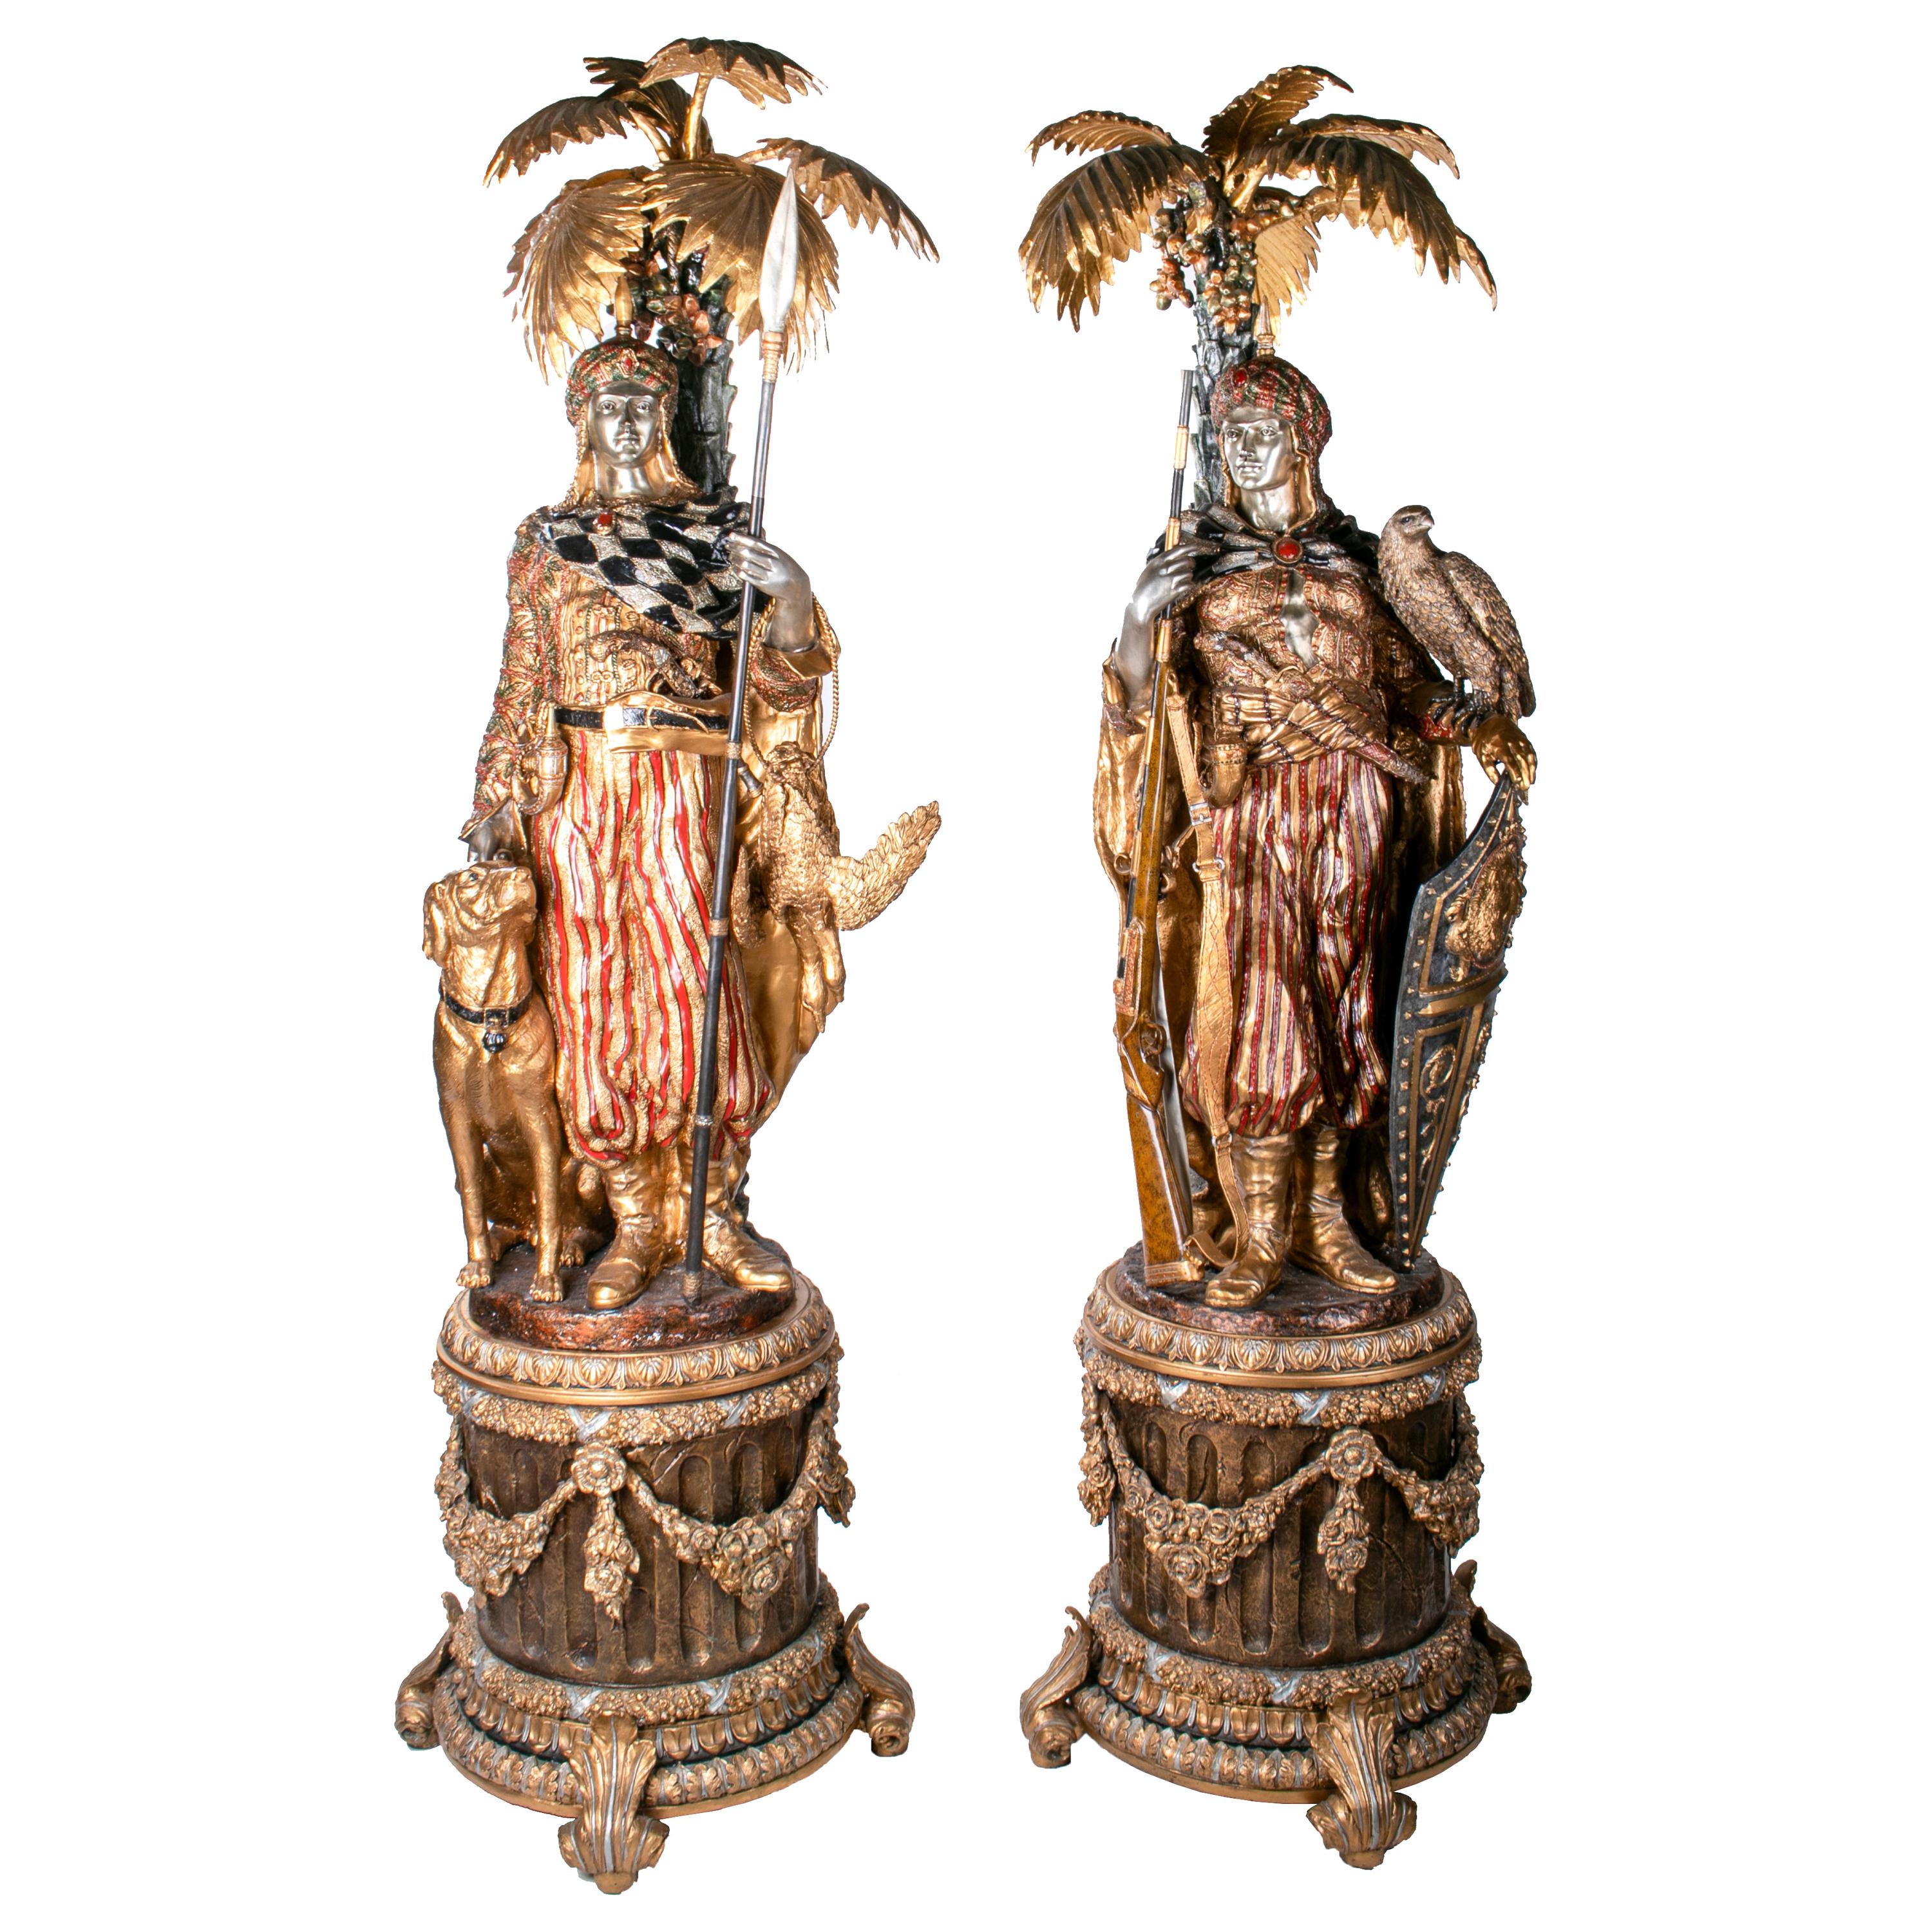 Pair of Polychrome Gilded Bronze Arab Hunters and Palms Sculptures on Pedestals